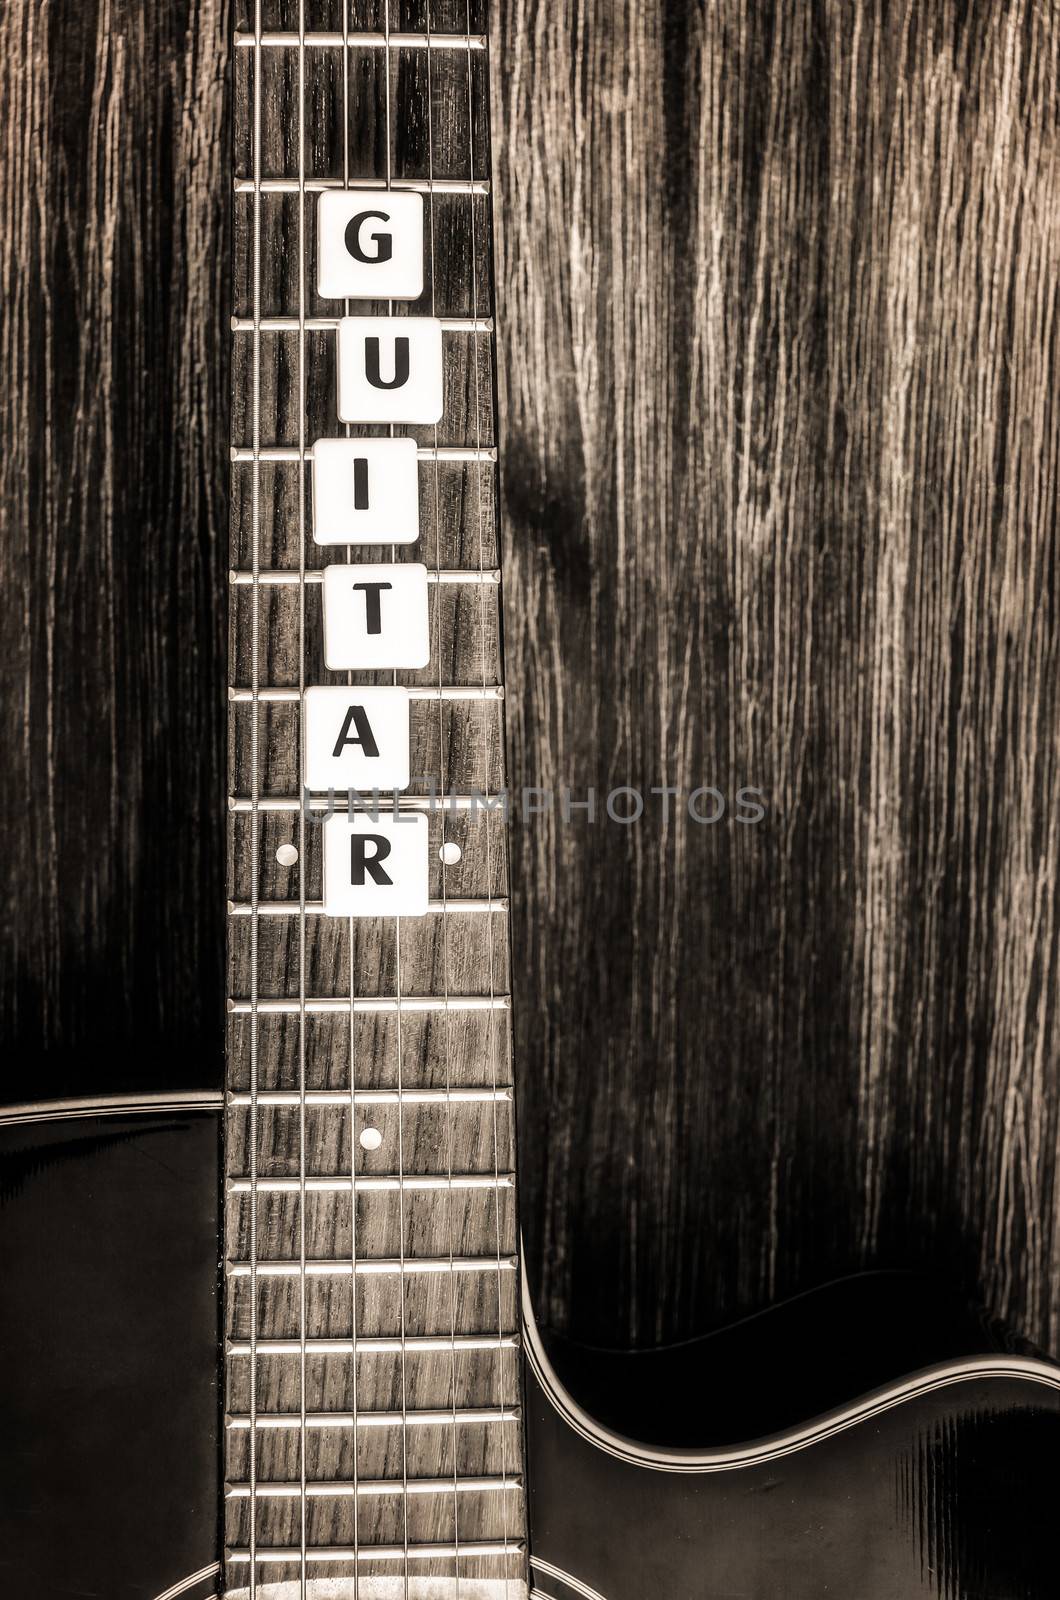 Acoustic guitar in vintage style on wood texture background